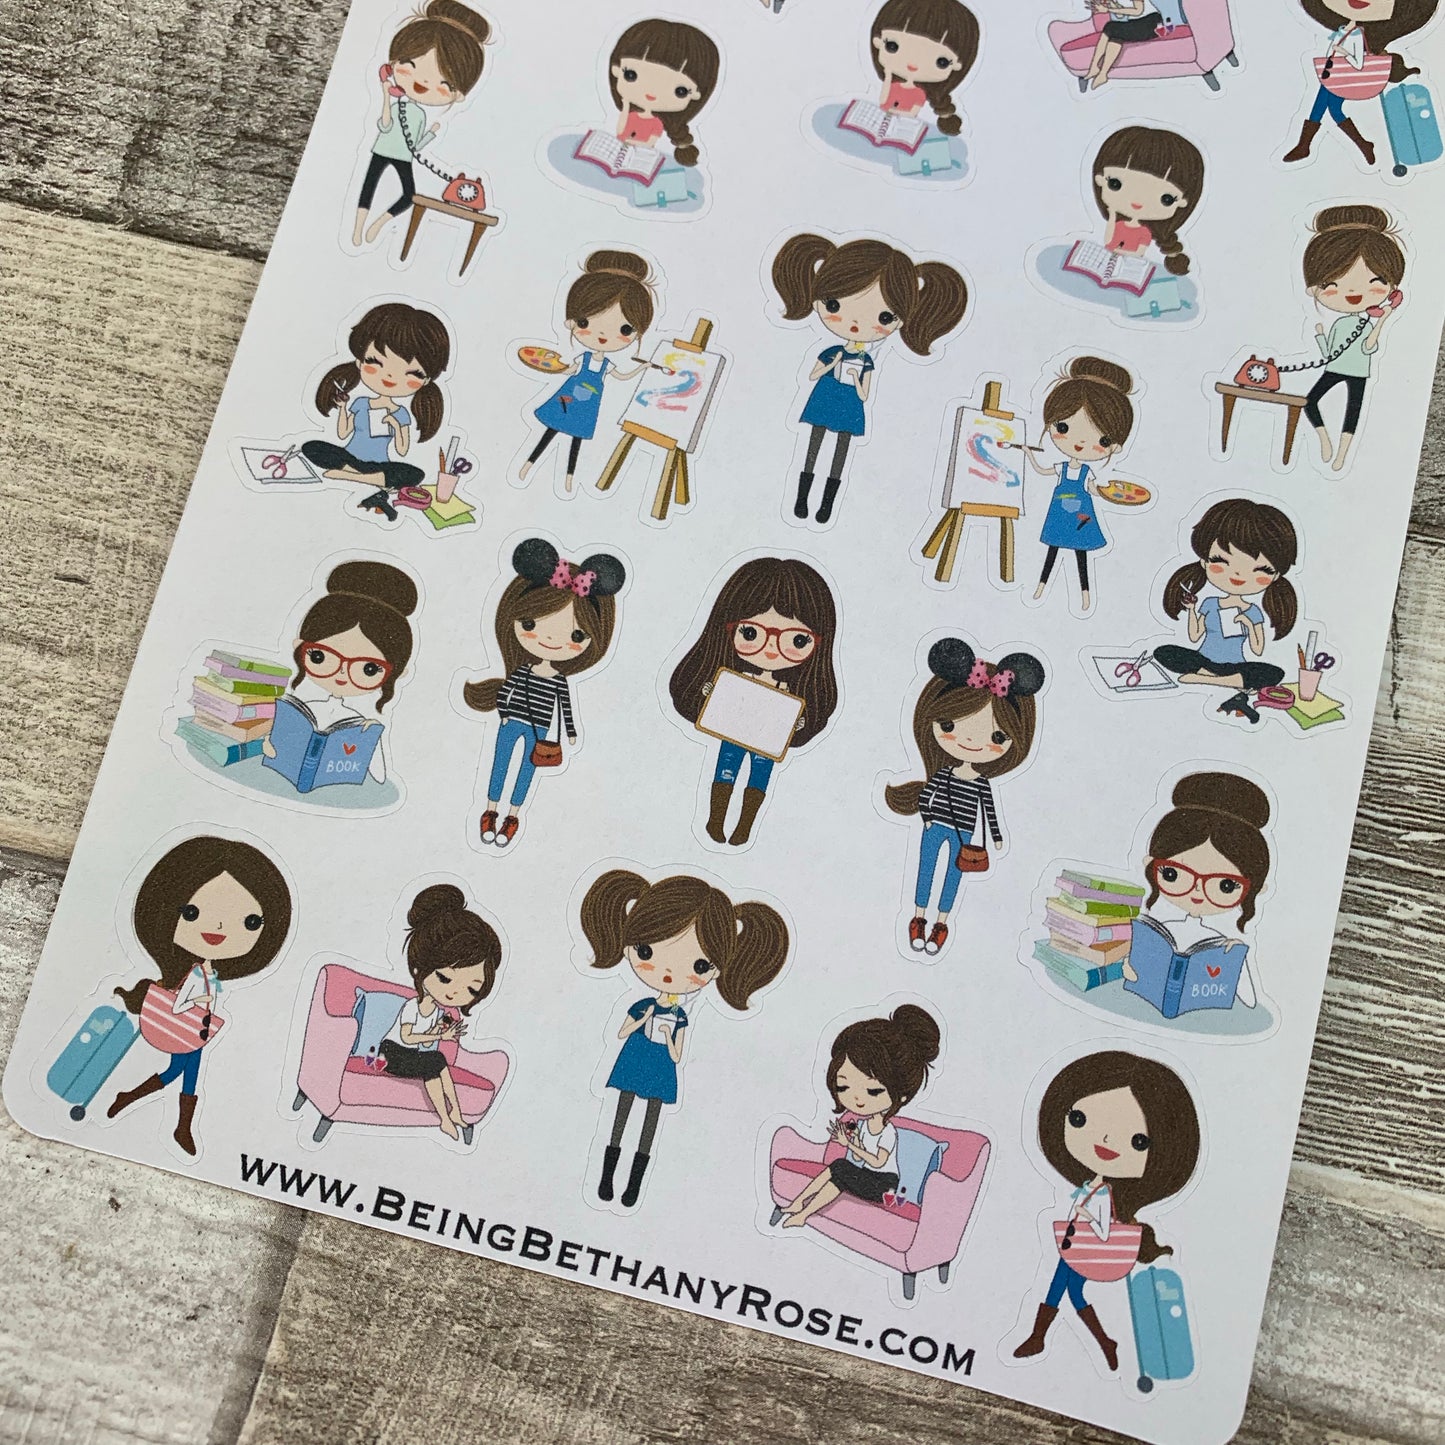 Mixed character White Woman Stickers (DPD1451)